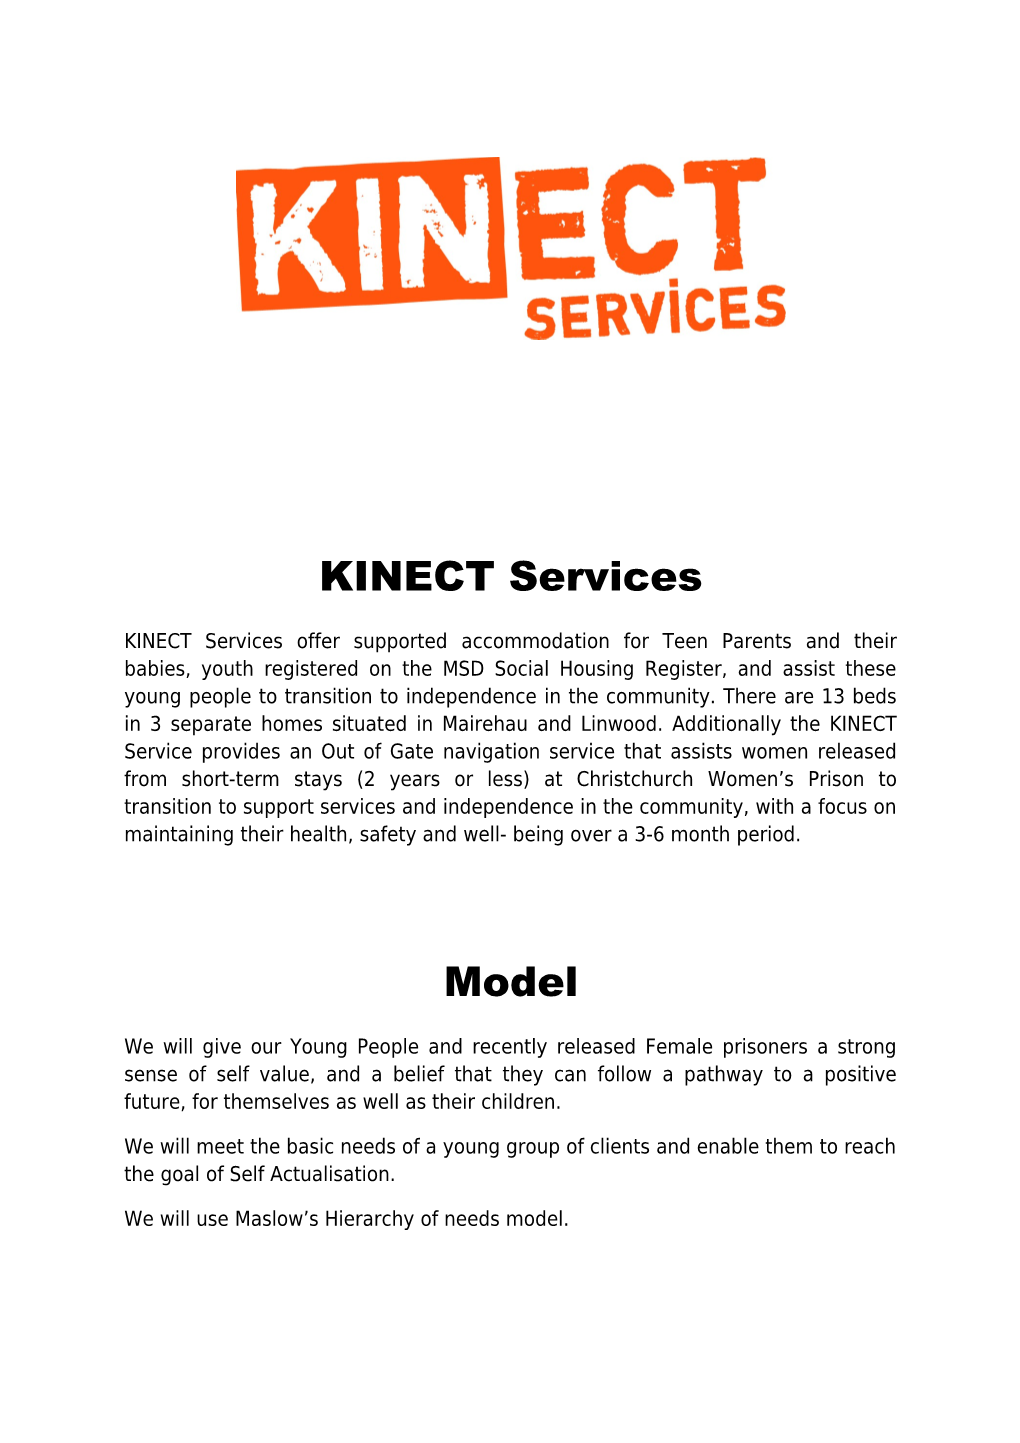 KINECT Services